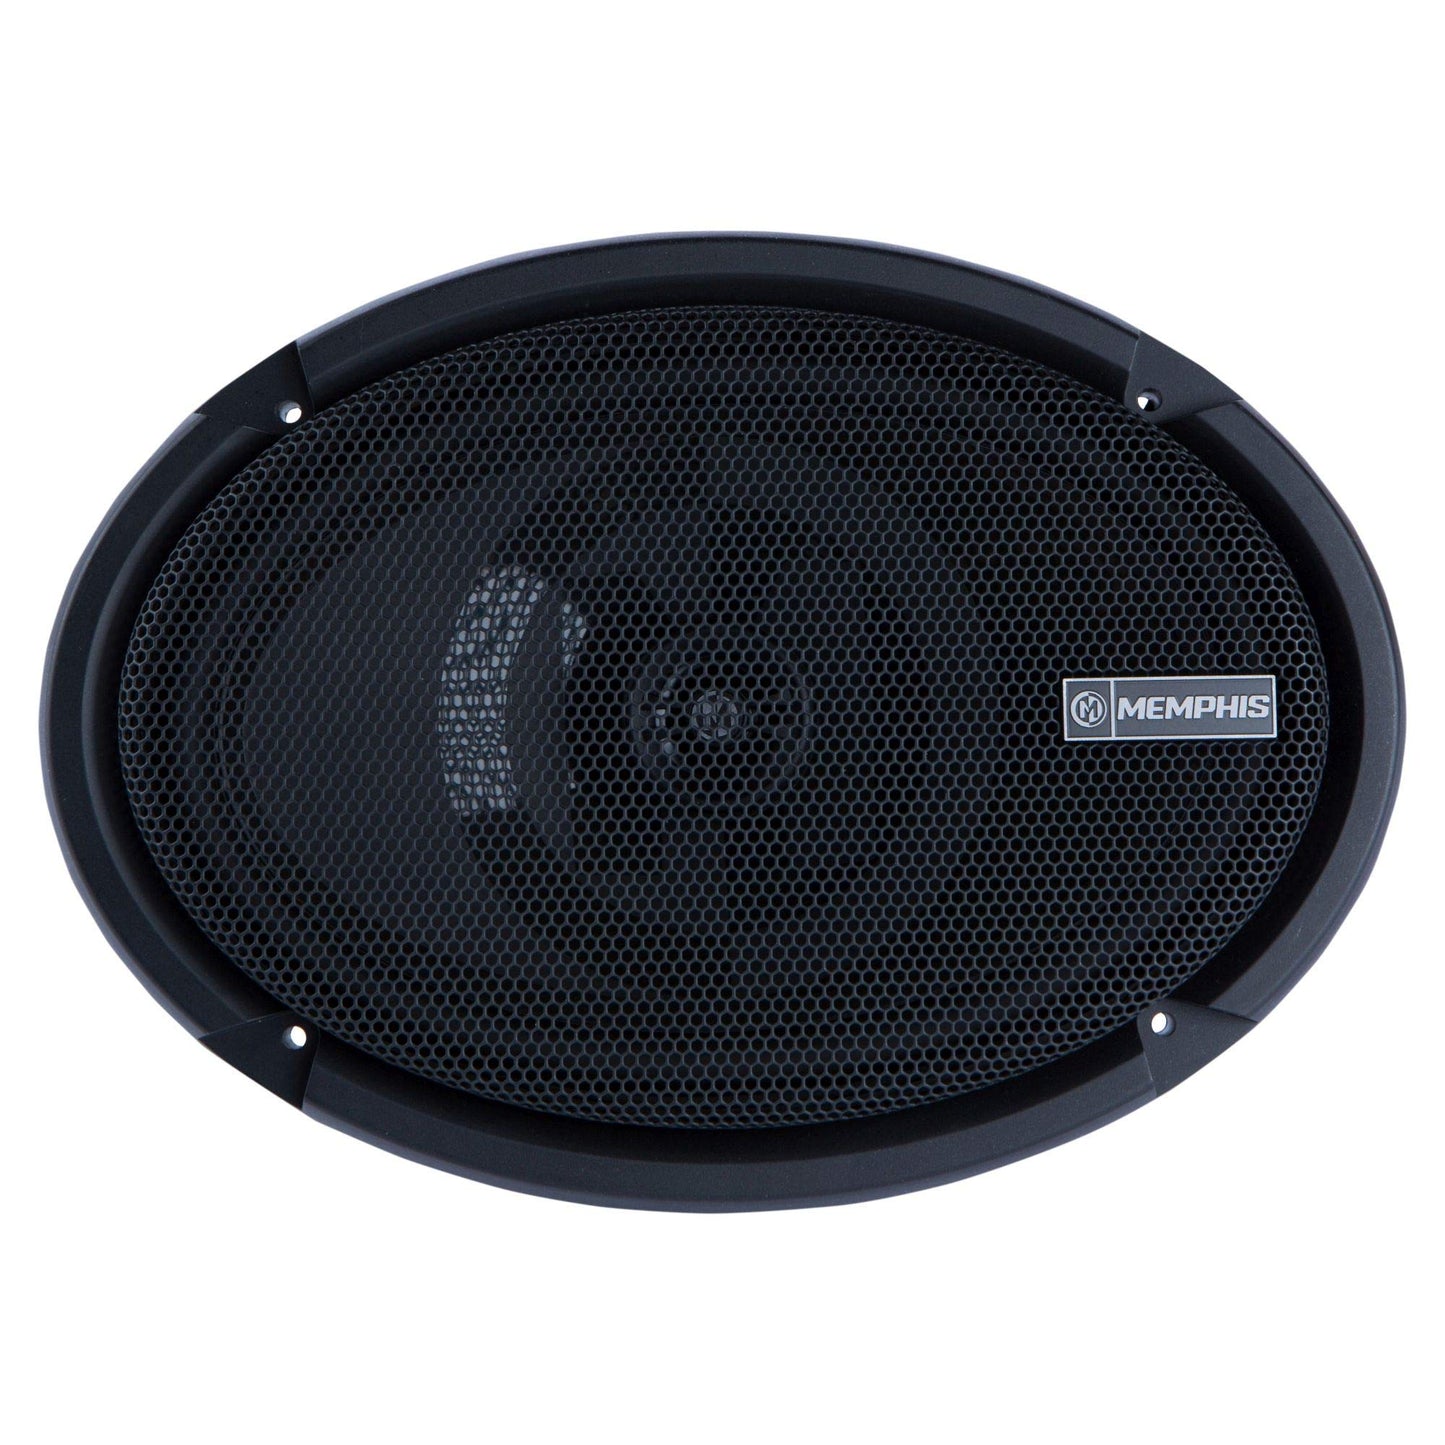 Memphis PRXS69 Power Reference 6" x 9" Coaxial Speaker - Shallow